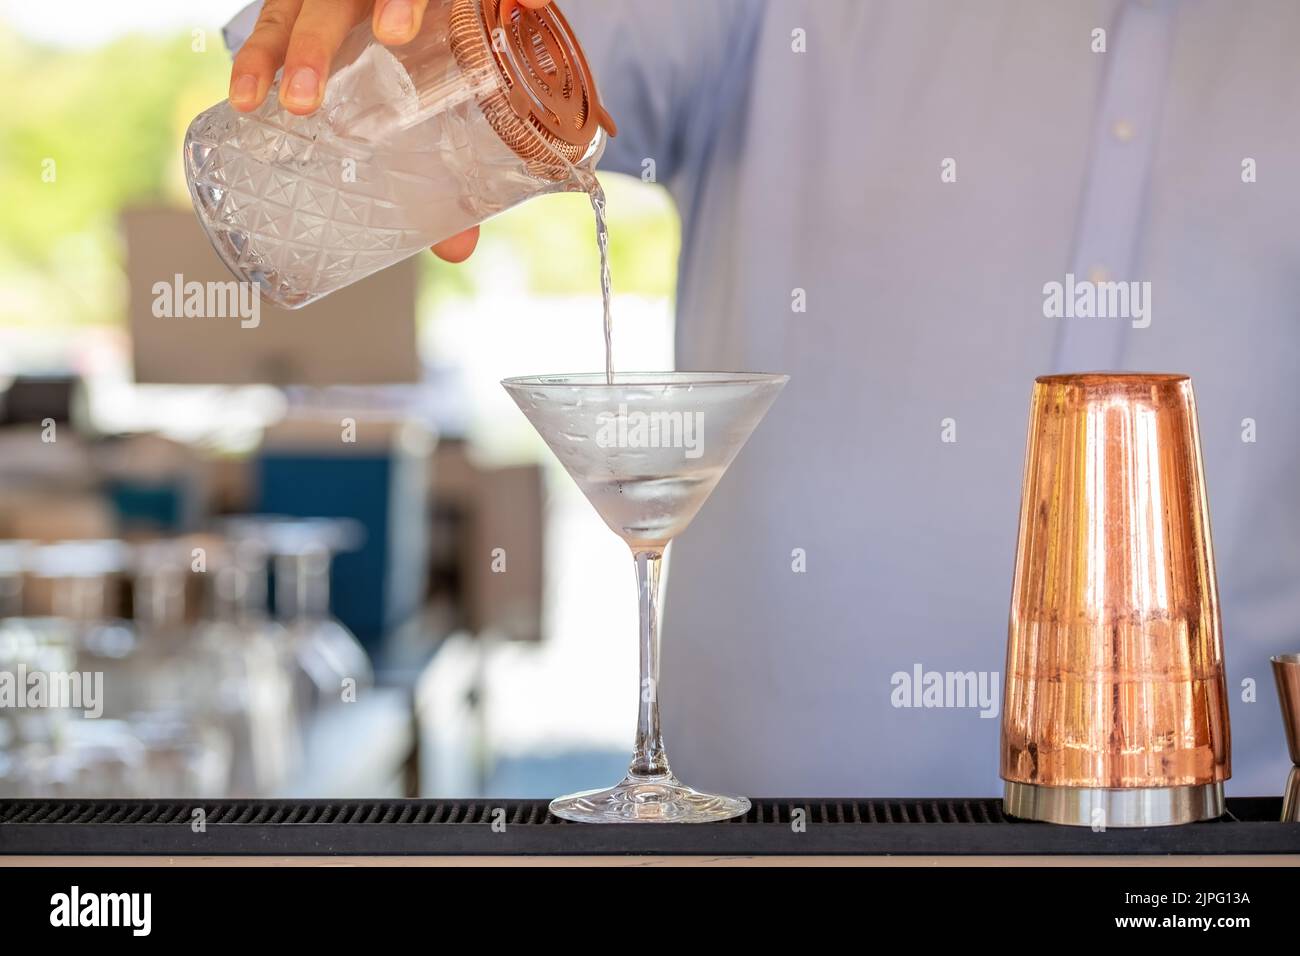 Professional bartender pouring cocktail into glass glass with shaker Stock Photo